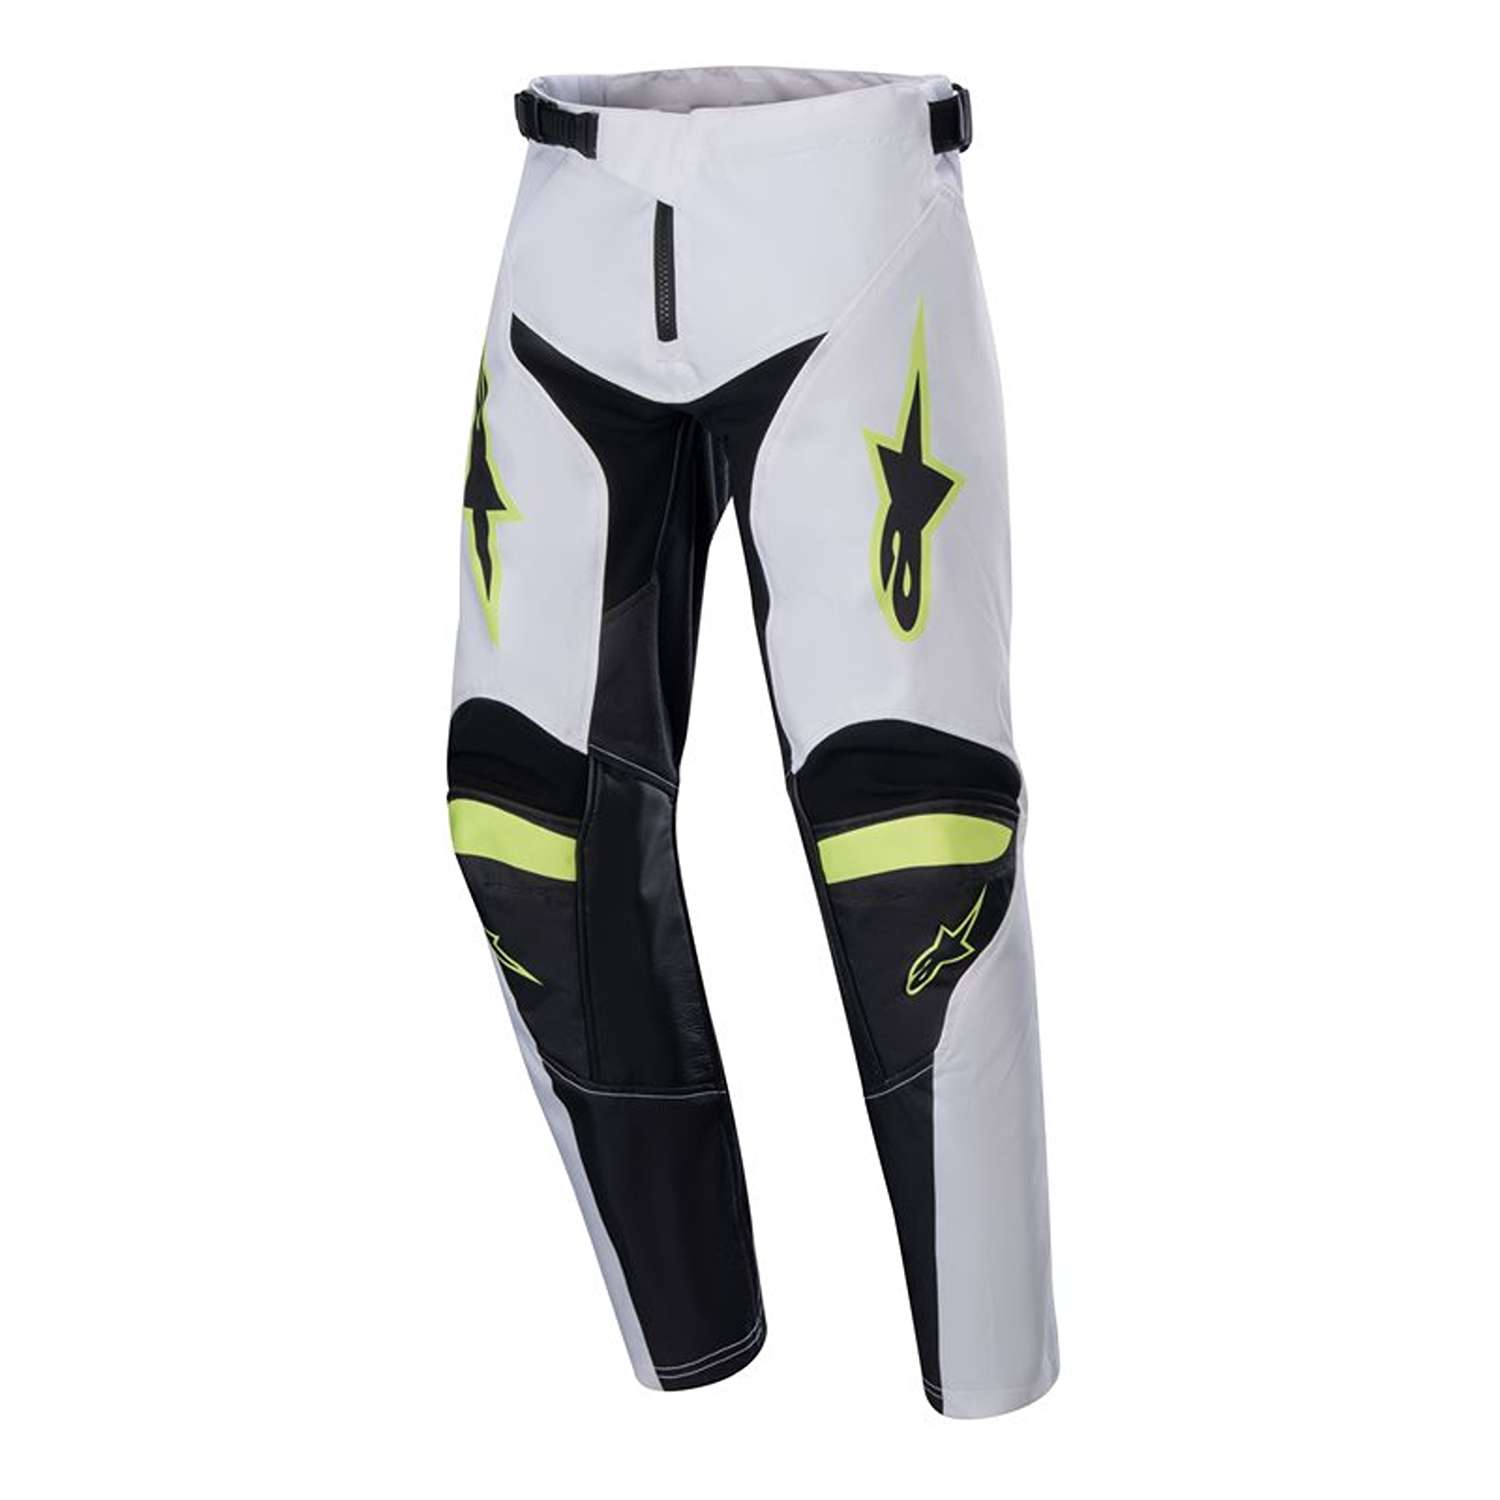 Image of Alpinestars Youth Racer Lucent Pants White Neon Red Yellow Fluo Talla 22